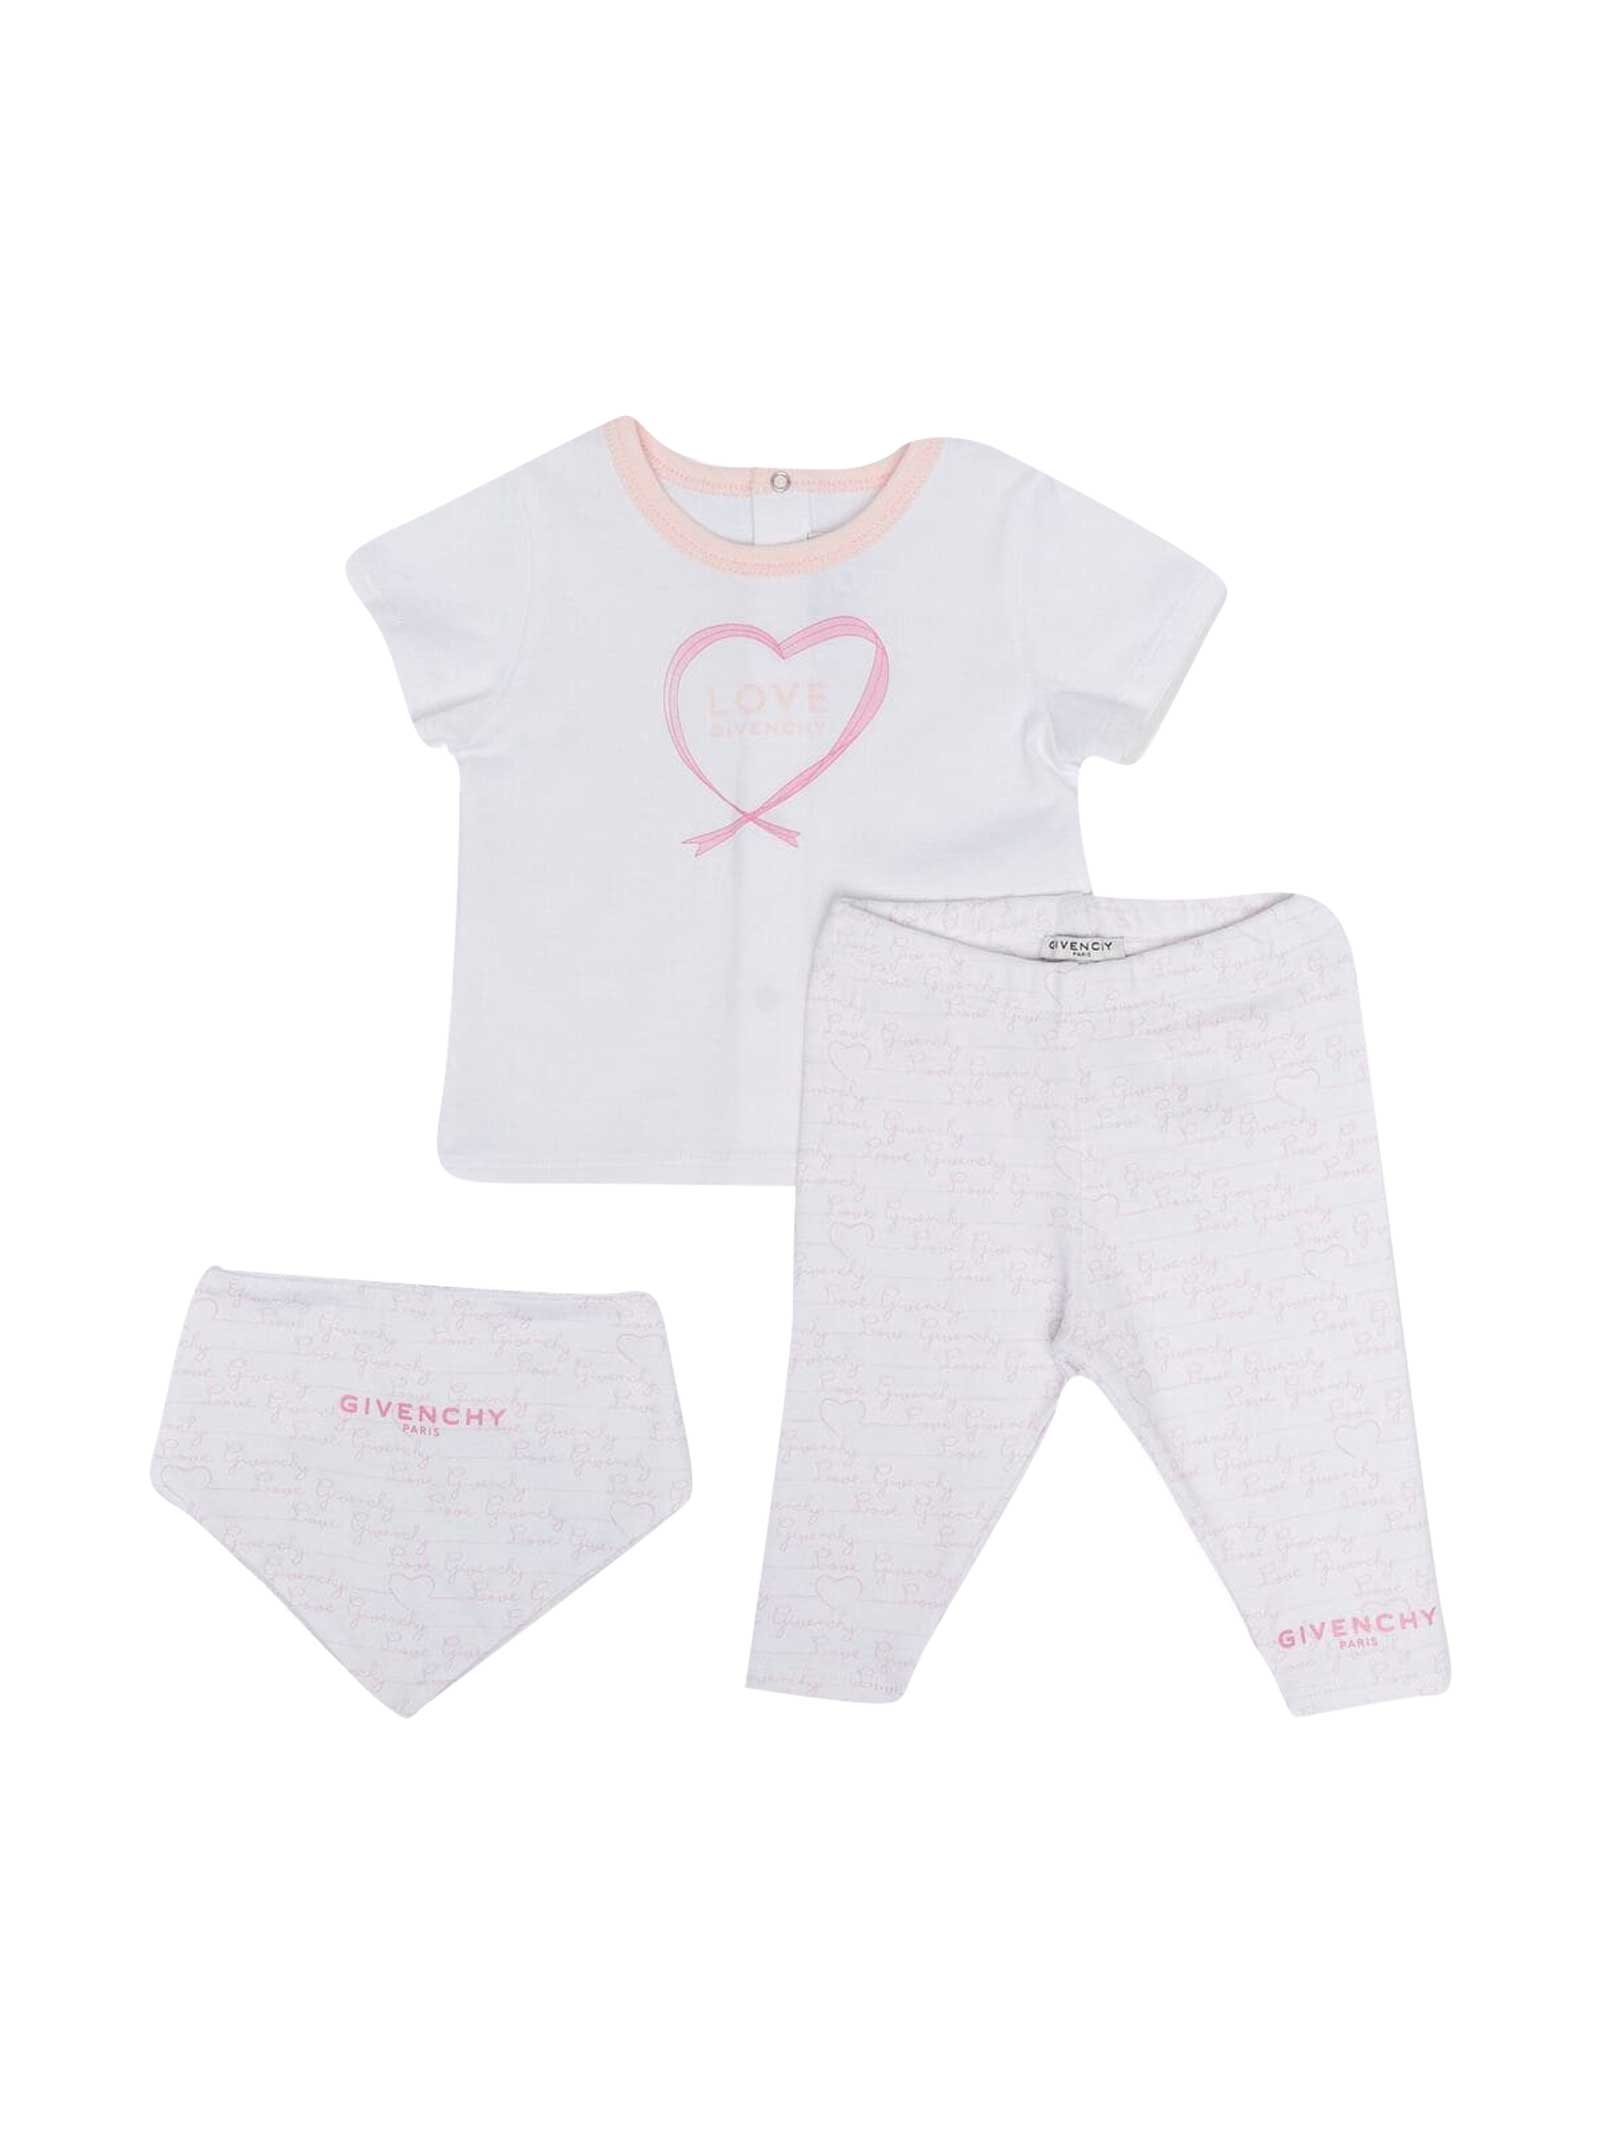 Givenchy White And Pink Baby Suit